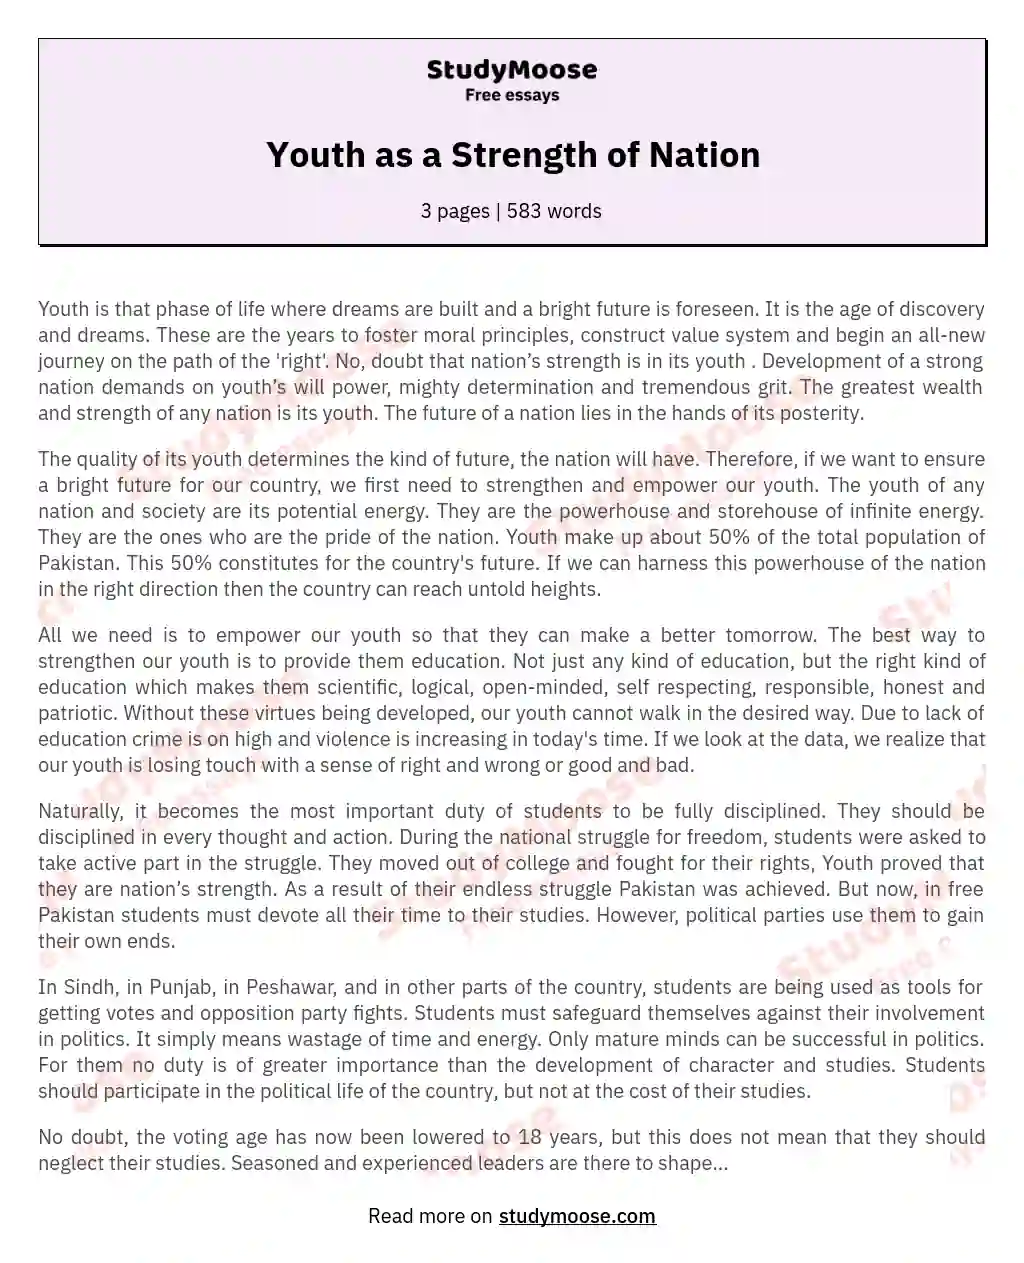 Youth as a Strength of Nation essay